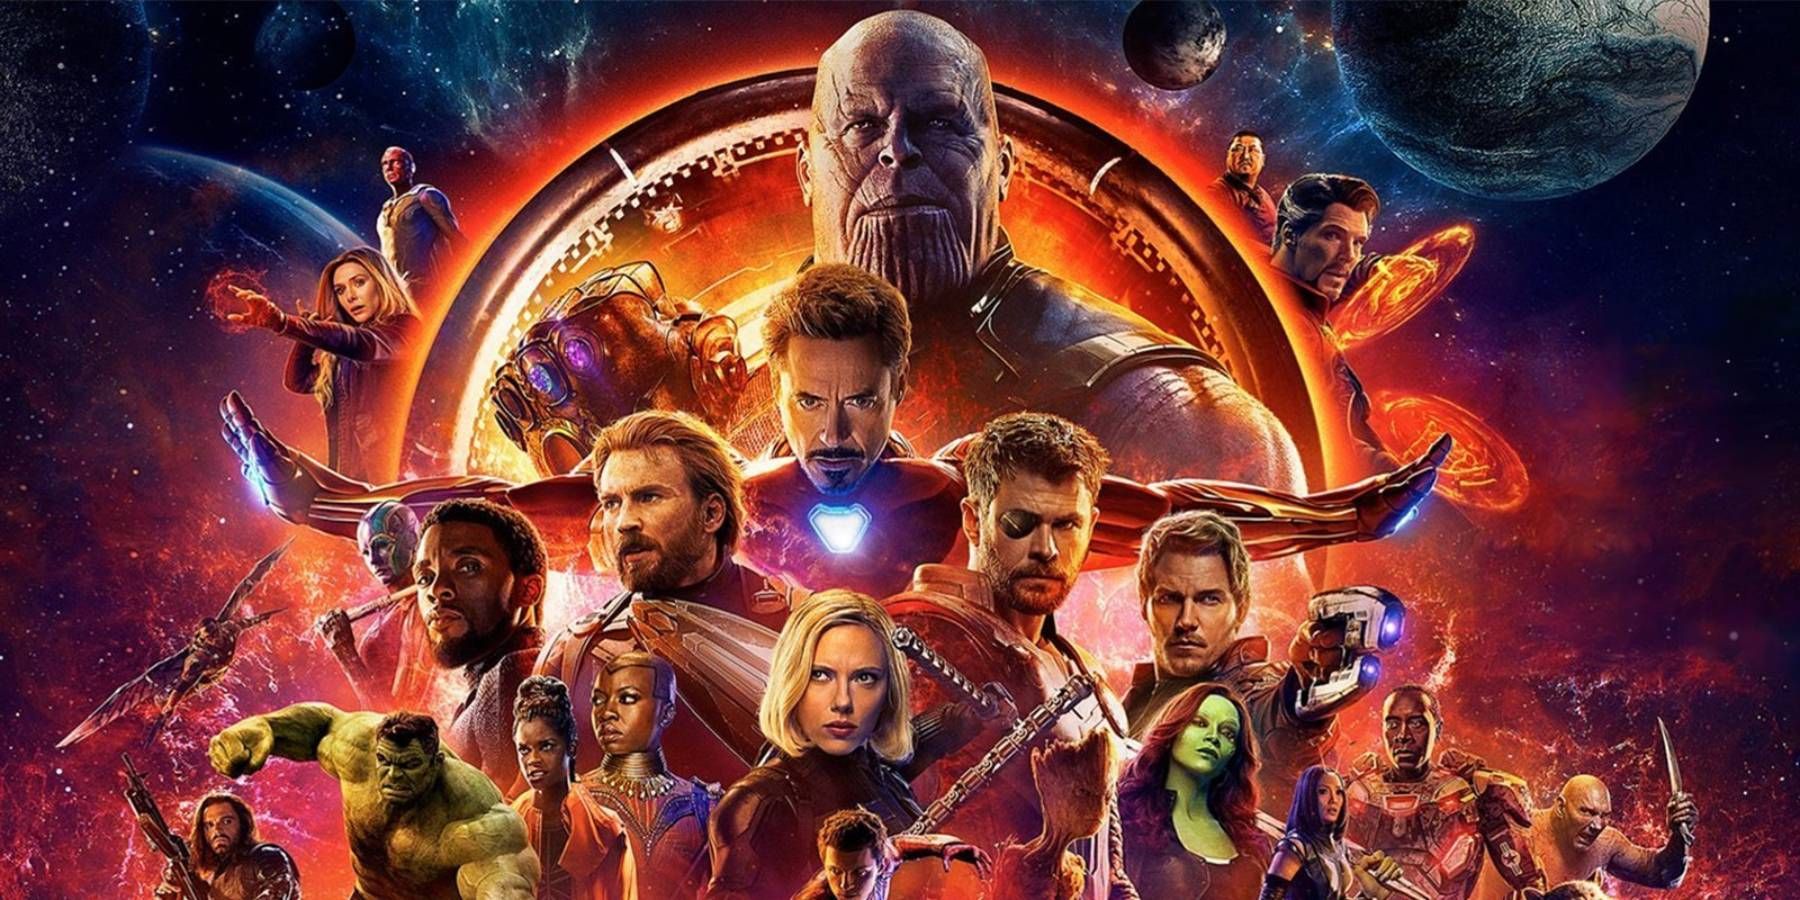 Poster for Avengers: Infinity War cropped